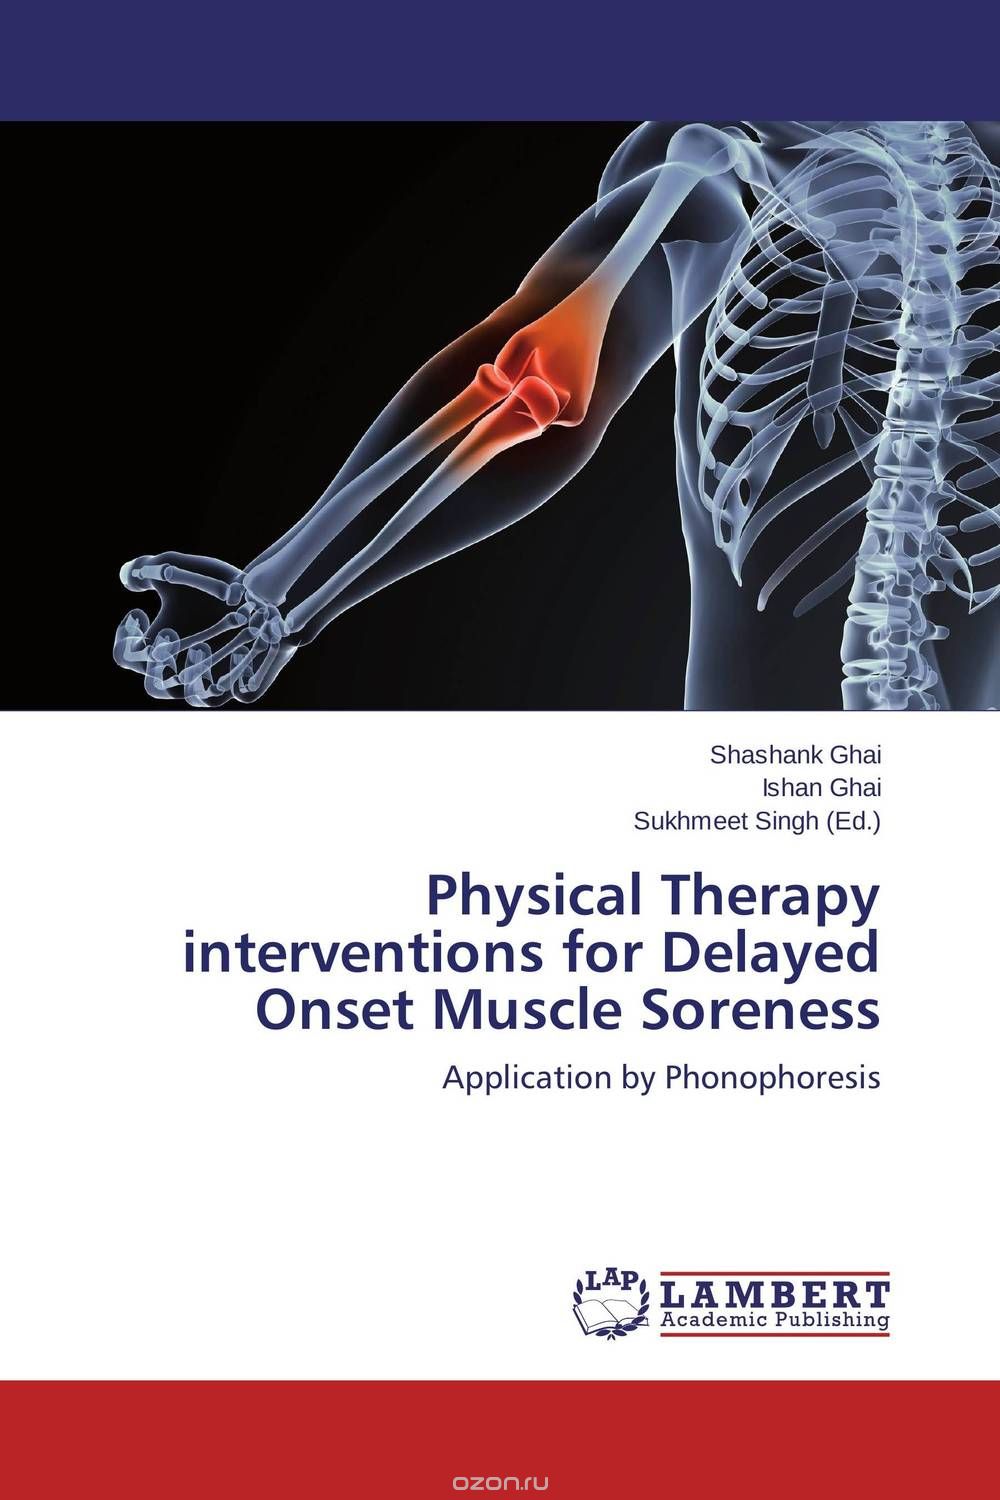 Скачать книгу "Physical Therapy interventions for Delayed Onset Muscle Soreness"